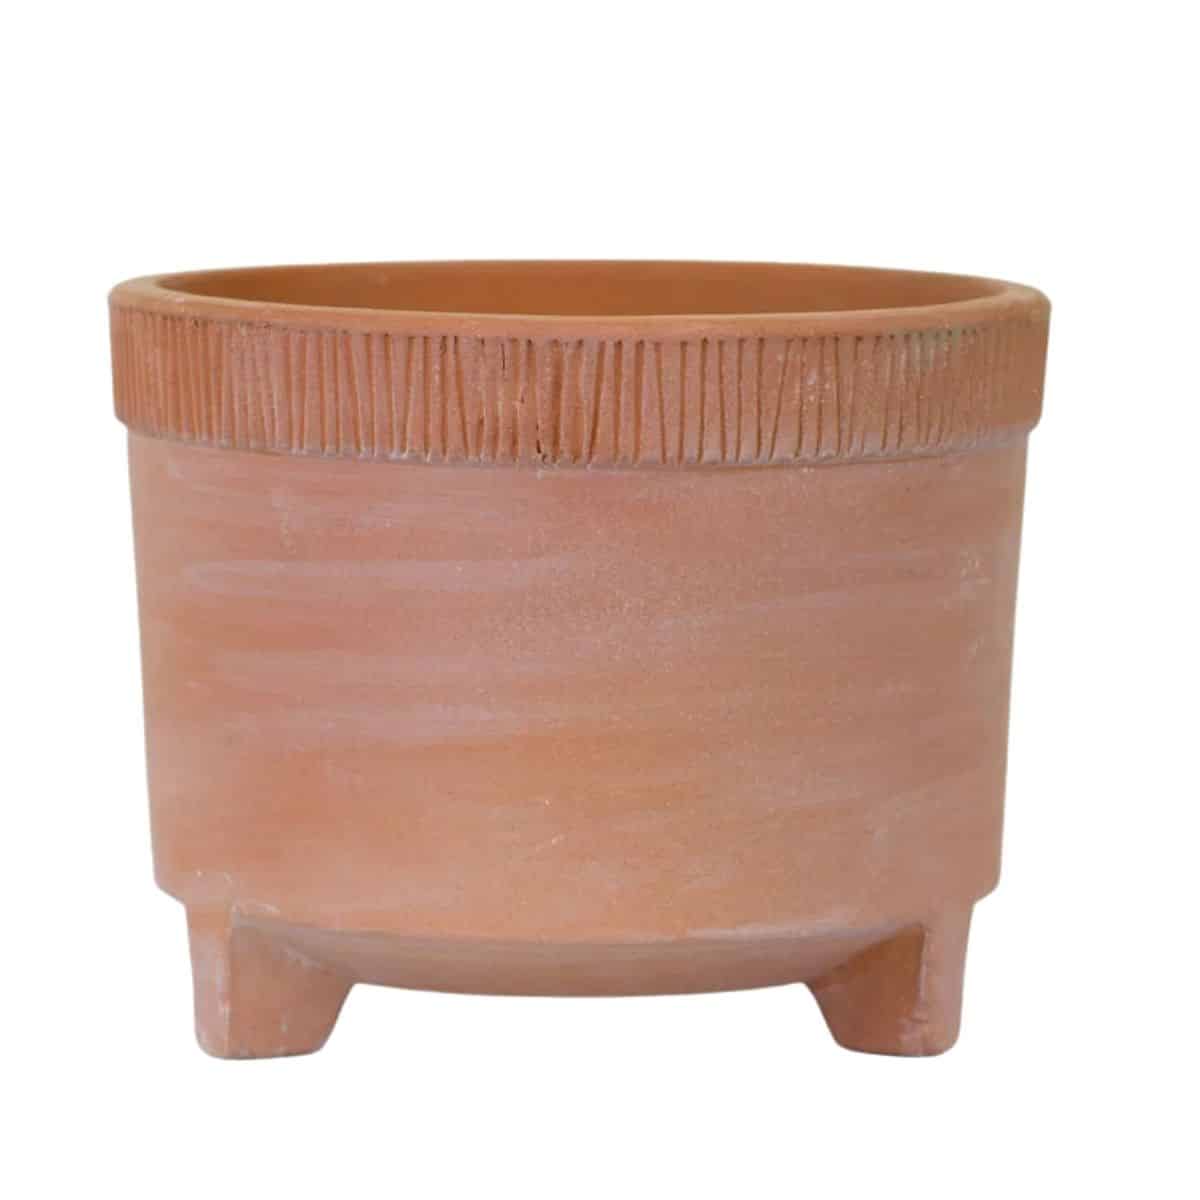 Clay planter with footed style from Walmart. 